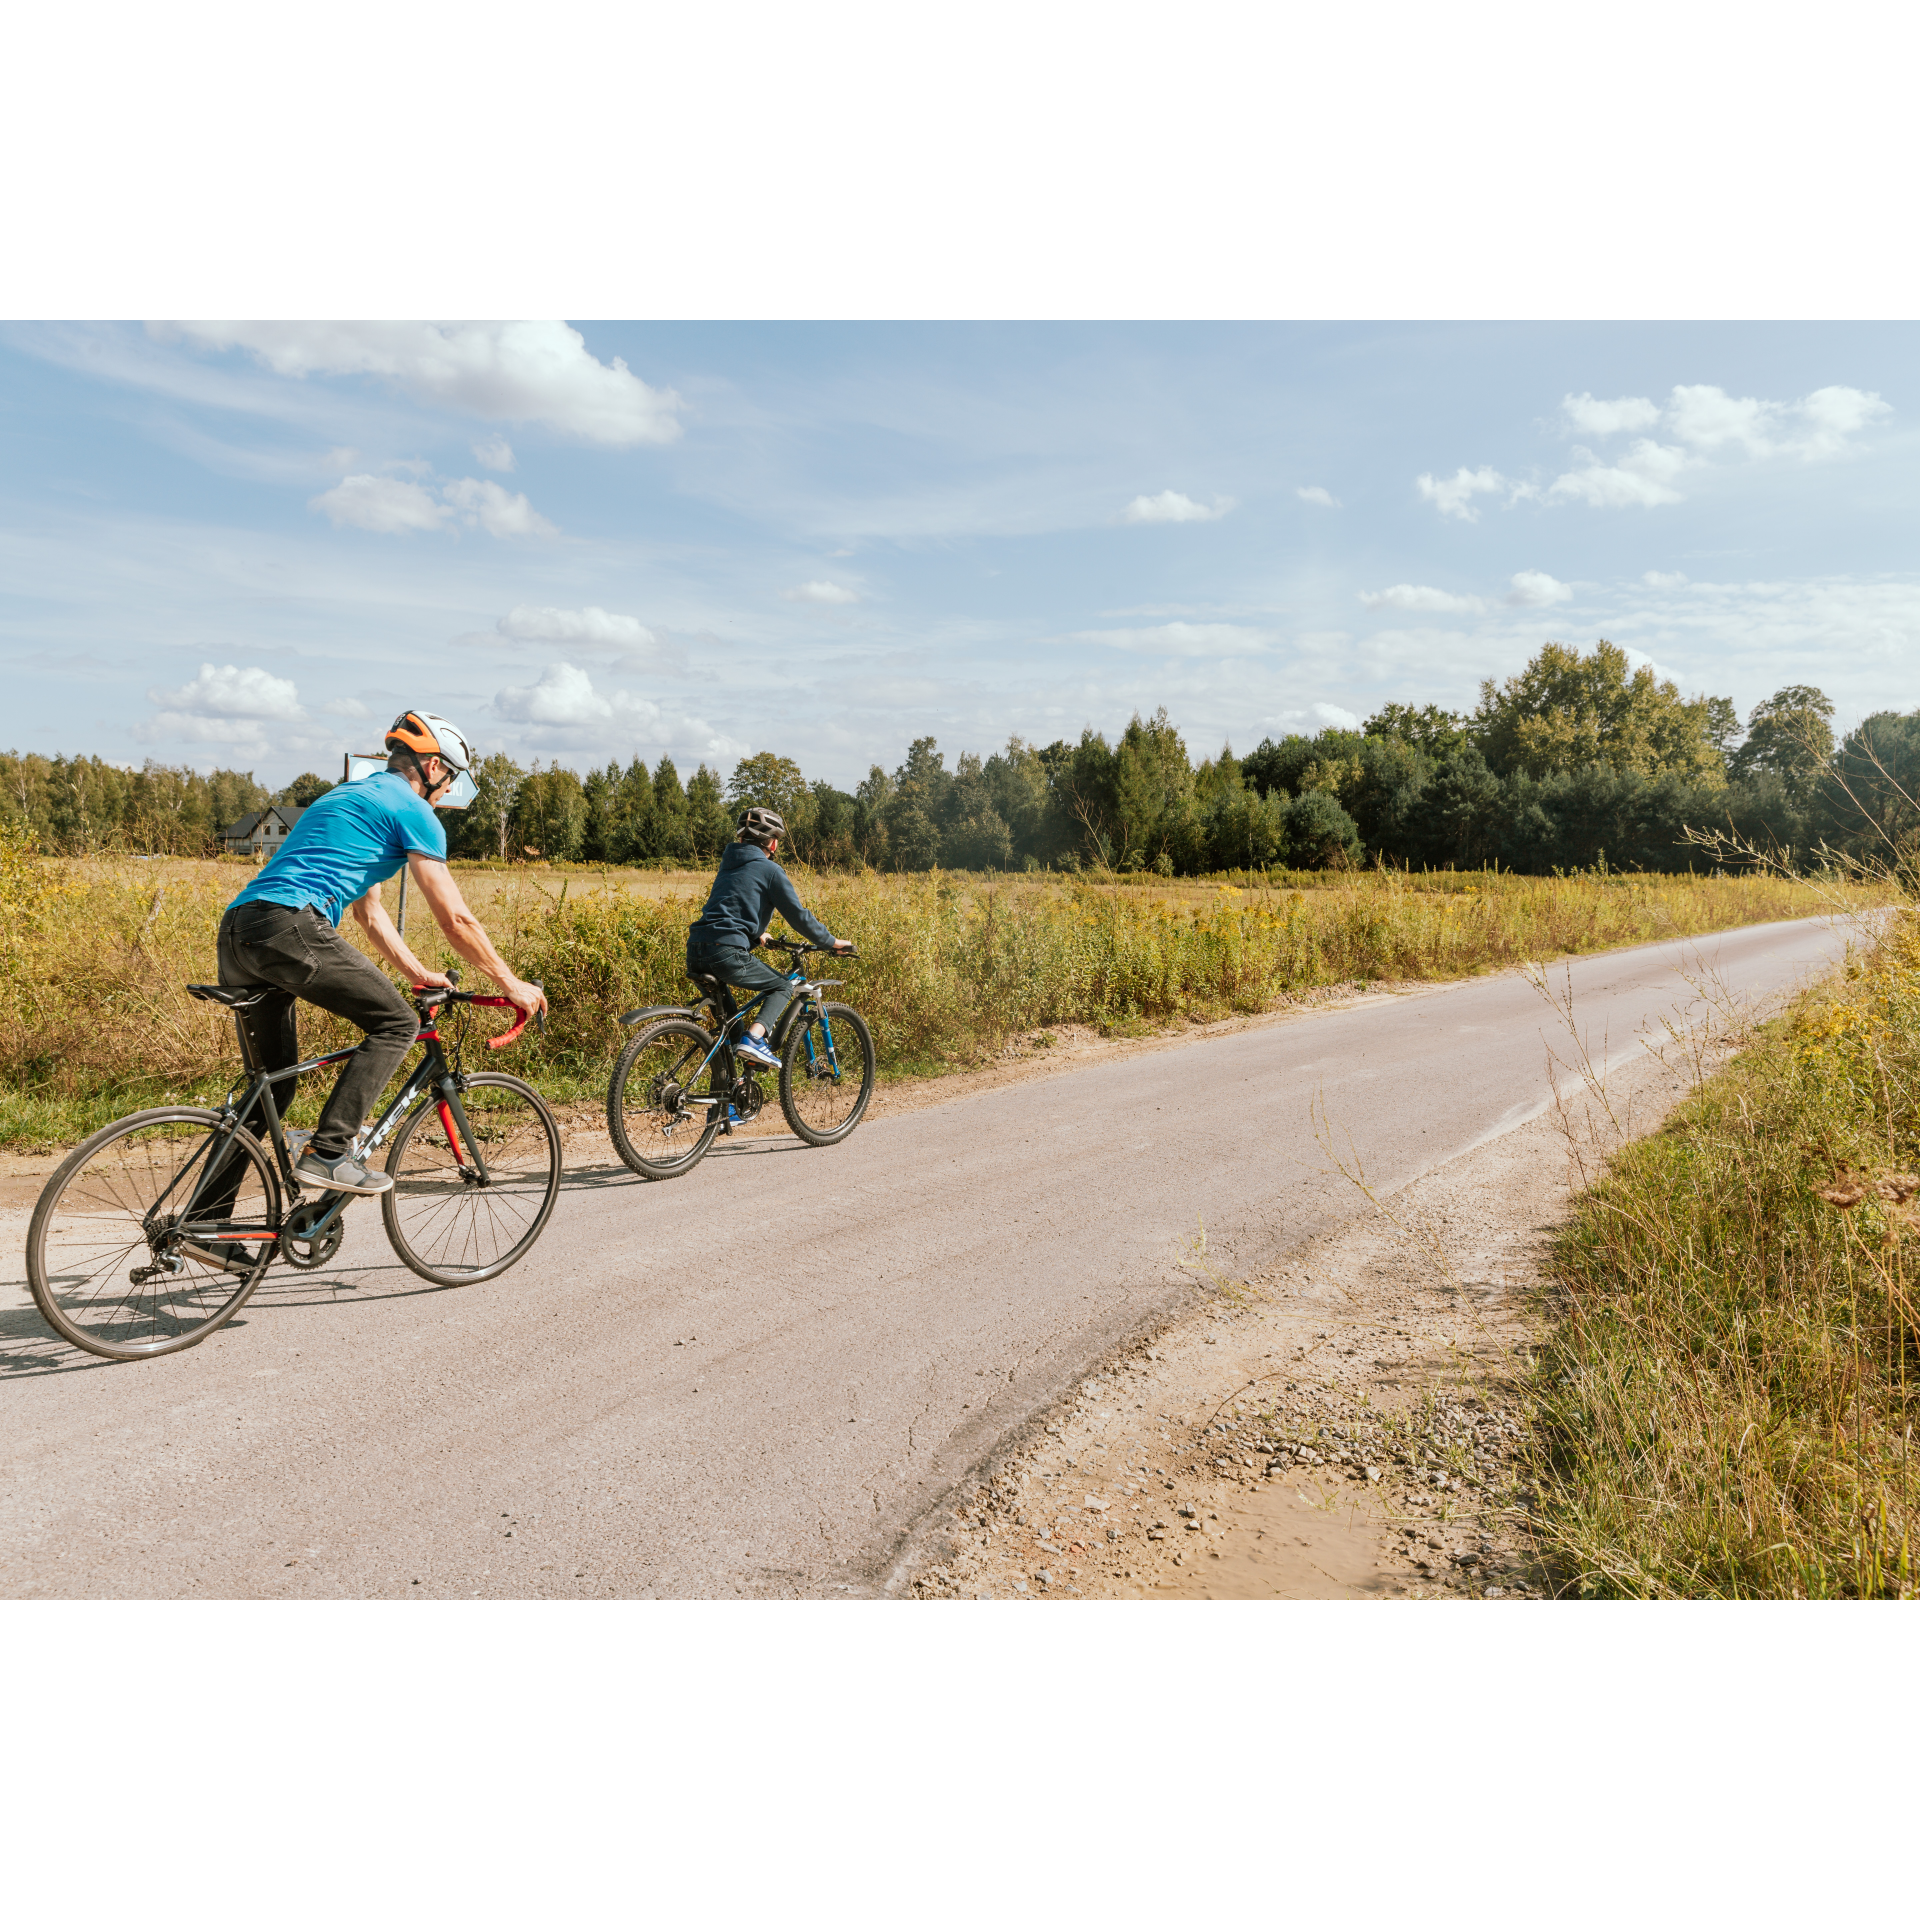 Cyclists on a dirt road